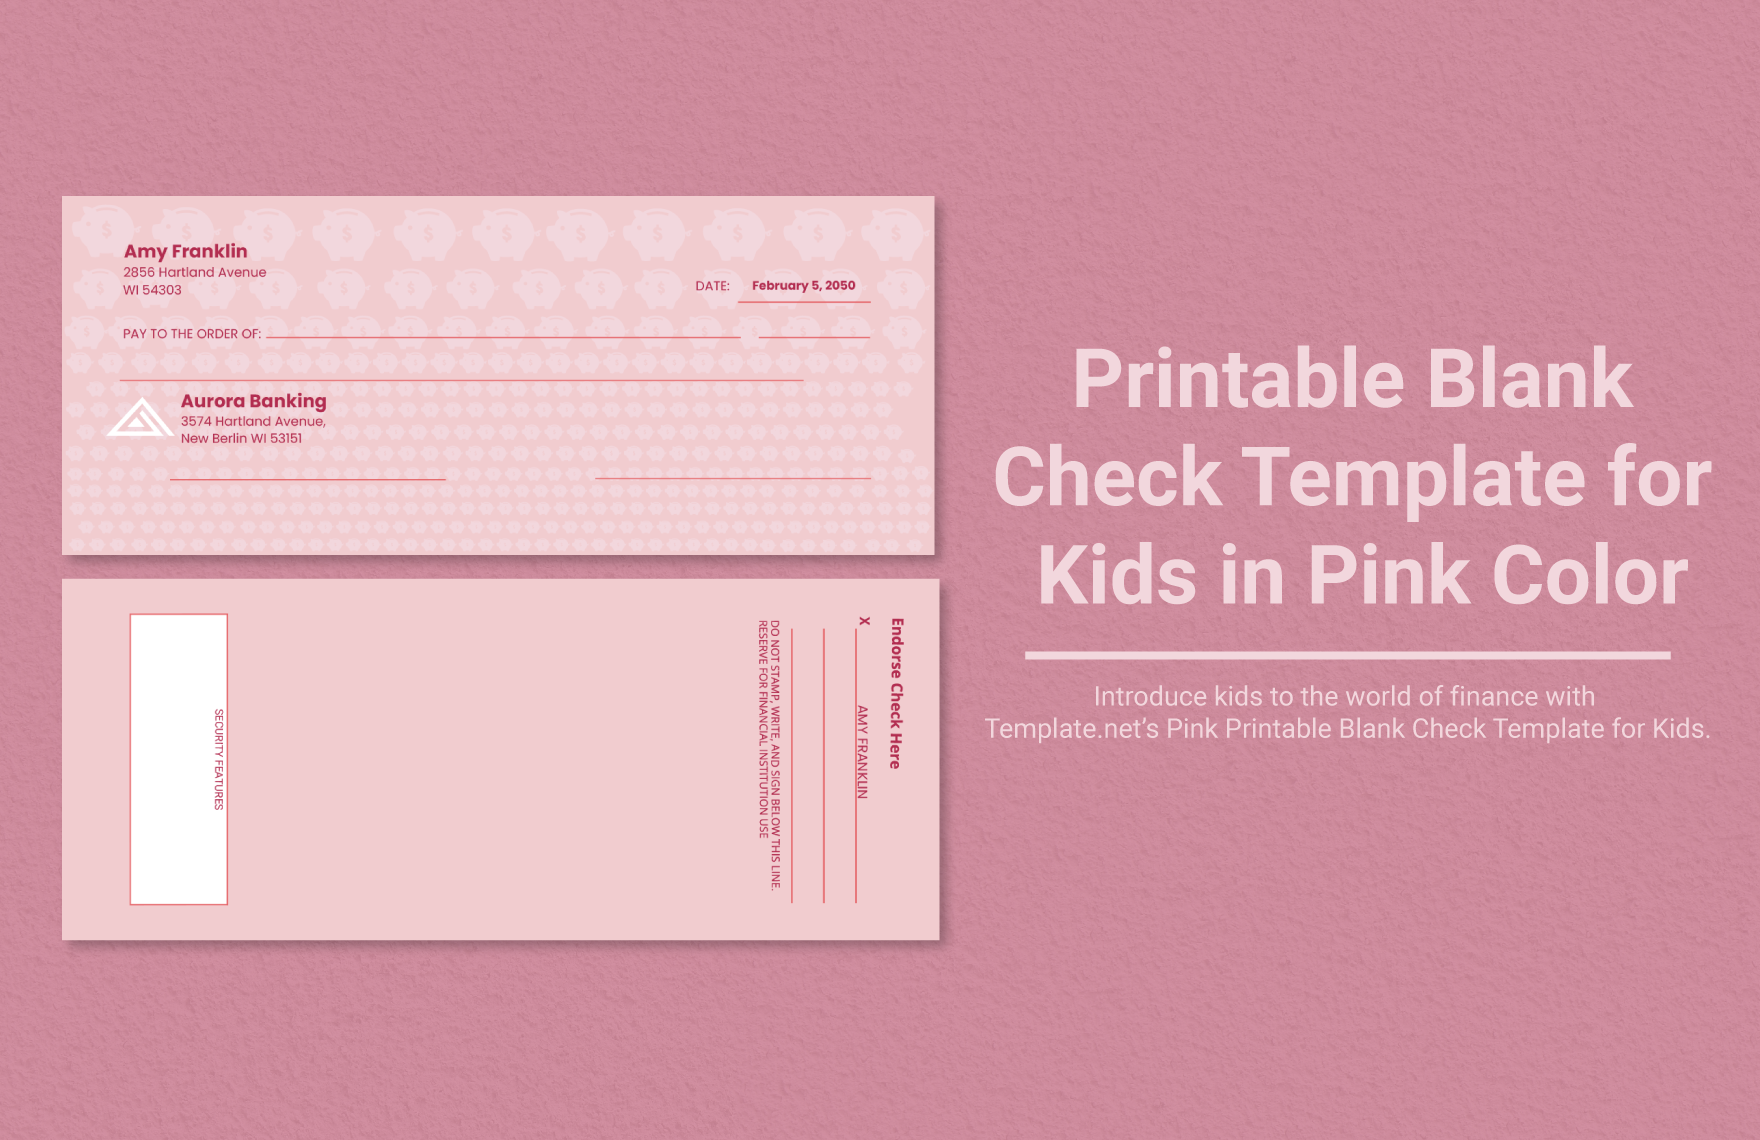 printable-blank-check-template-for-kids-in-pink-color-download-in